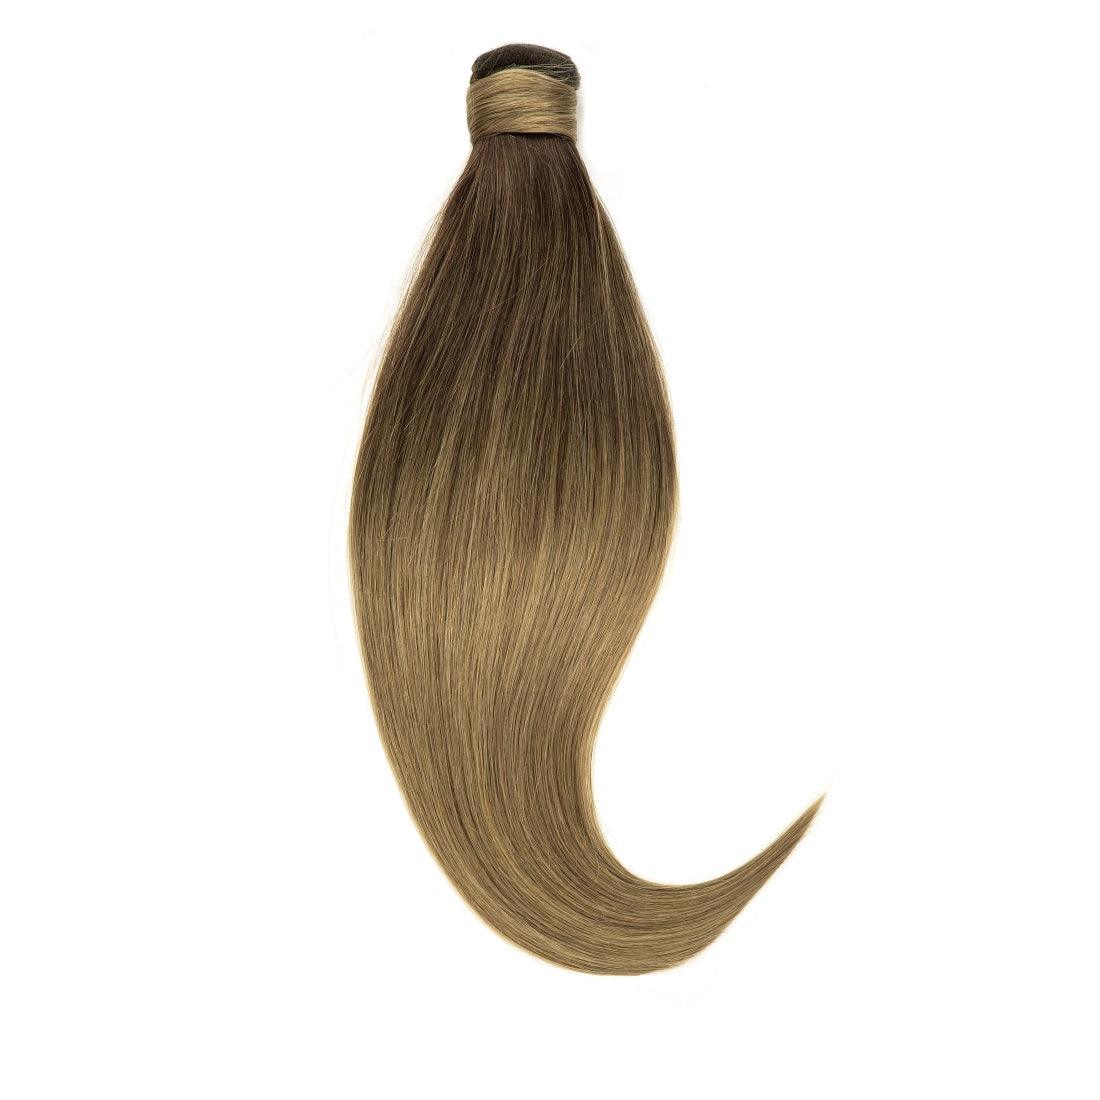 Ponytail Extensions T#M3-8-8 Ombre Darker Brown Mix Light Brown to Light Brown - lacerhair